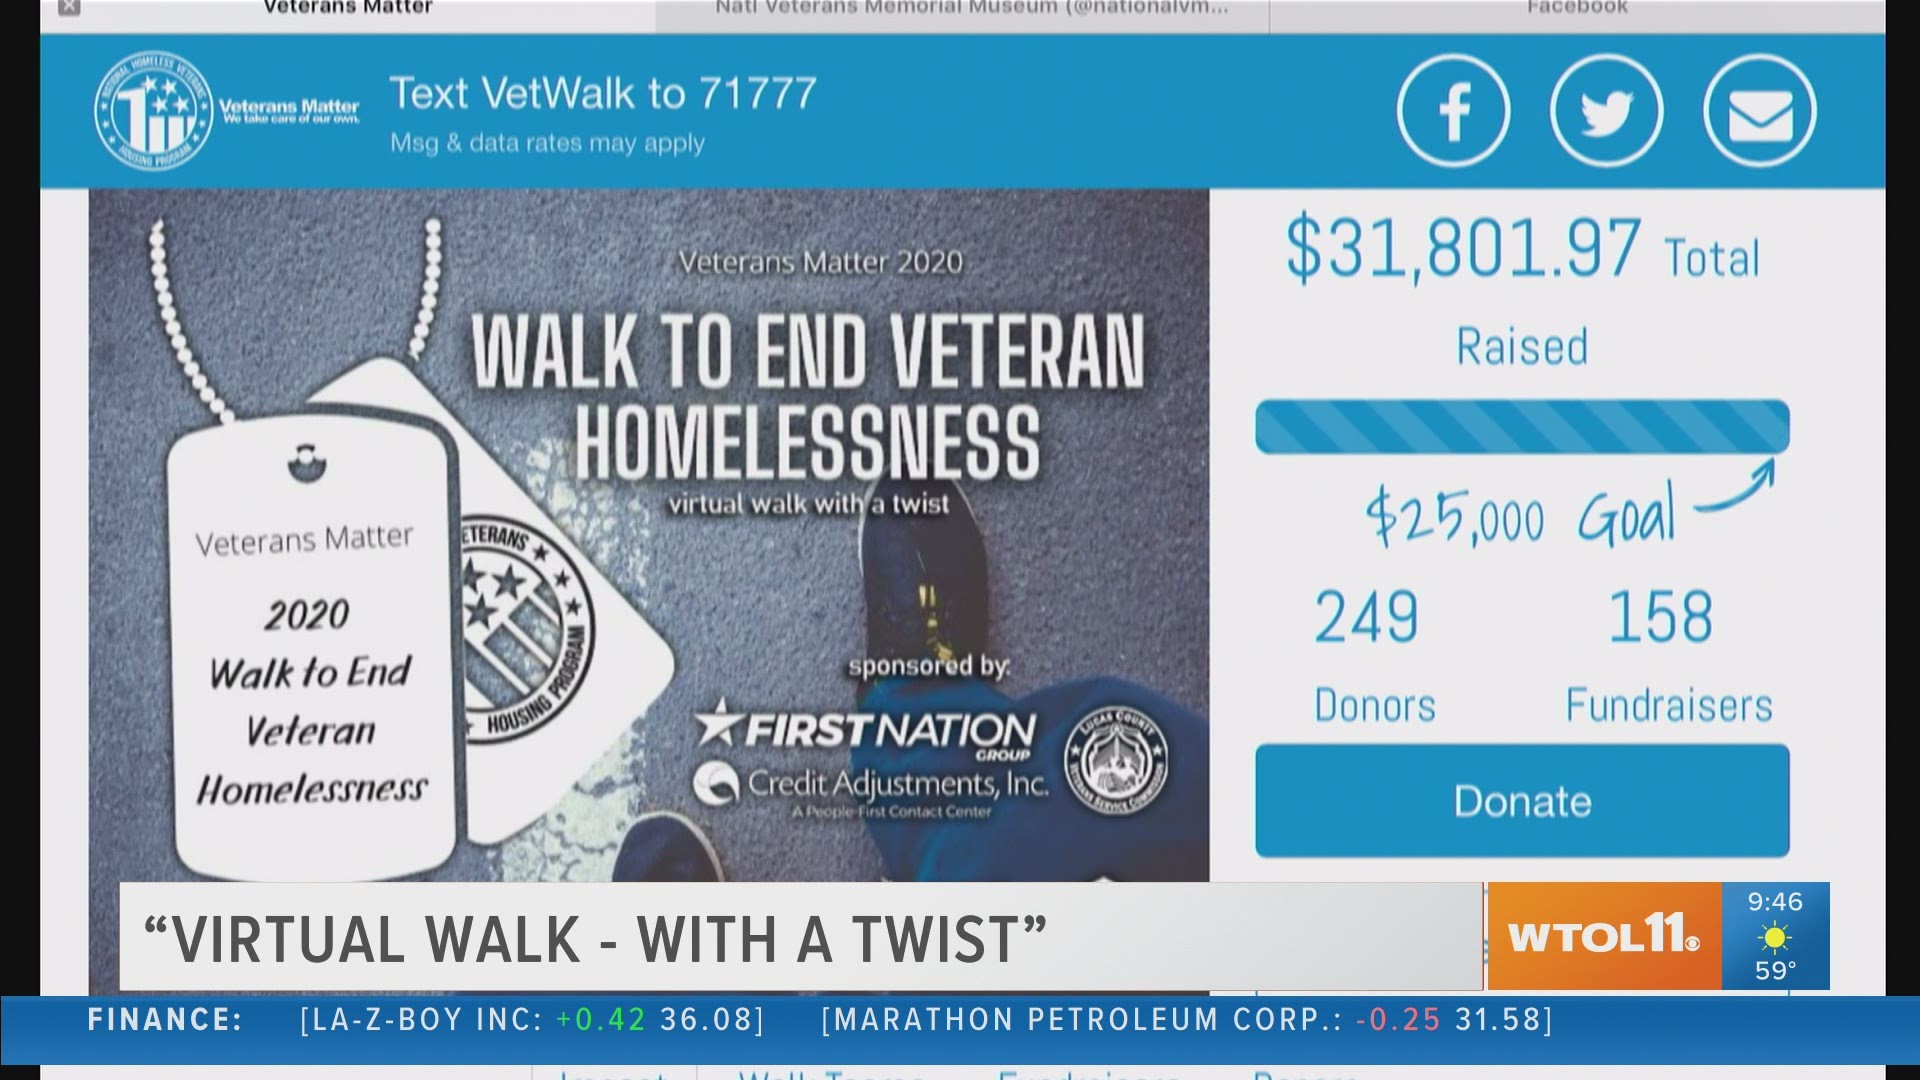 Veterans matter every day, but they deserve special recognition on Veterans Day! Veterans Matter is planning to do just that with "Virtual Walk - with a Twist!"